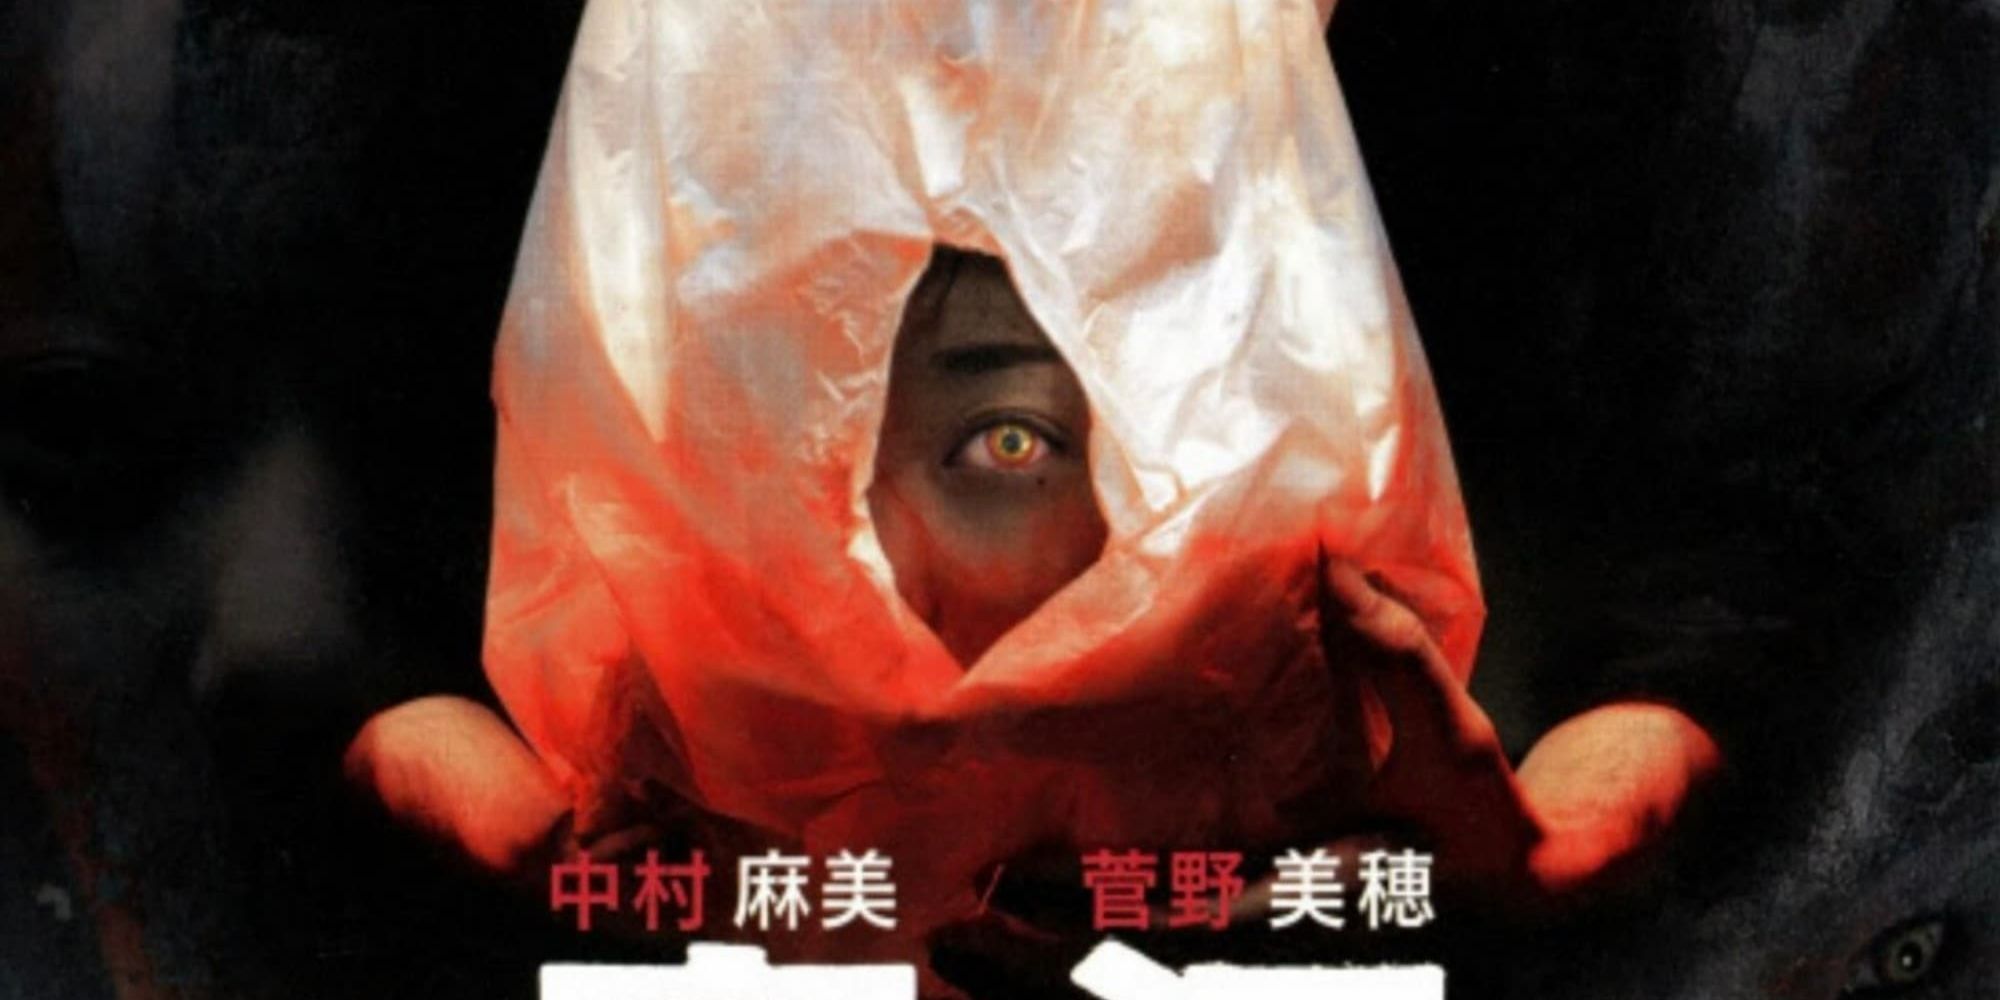 Tomie - Film Poster